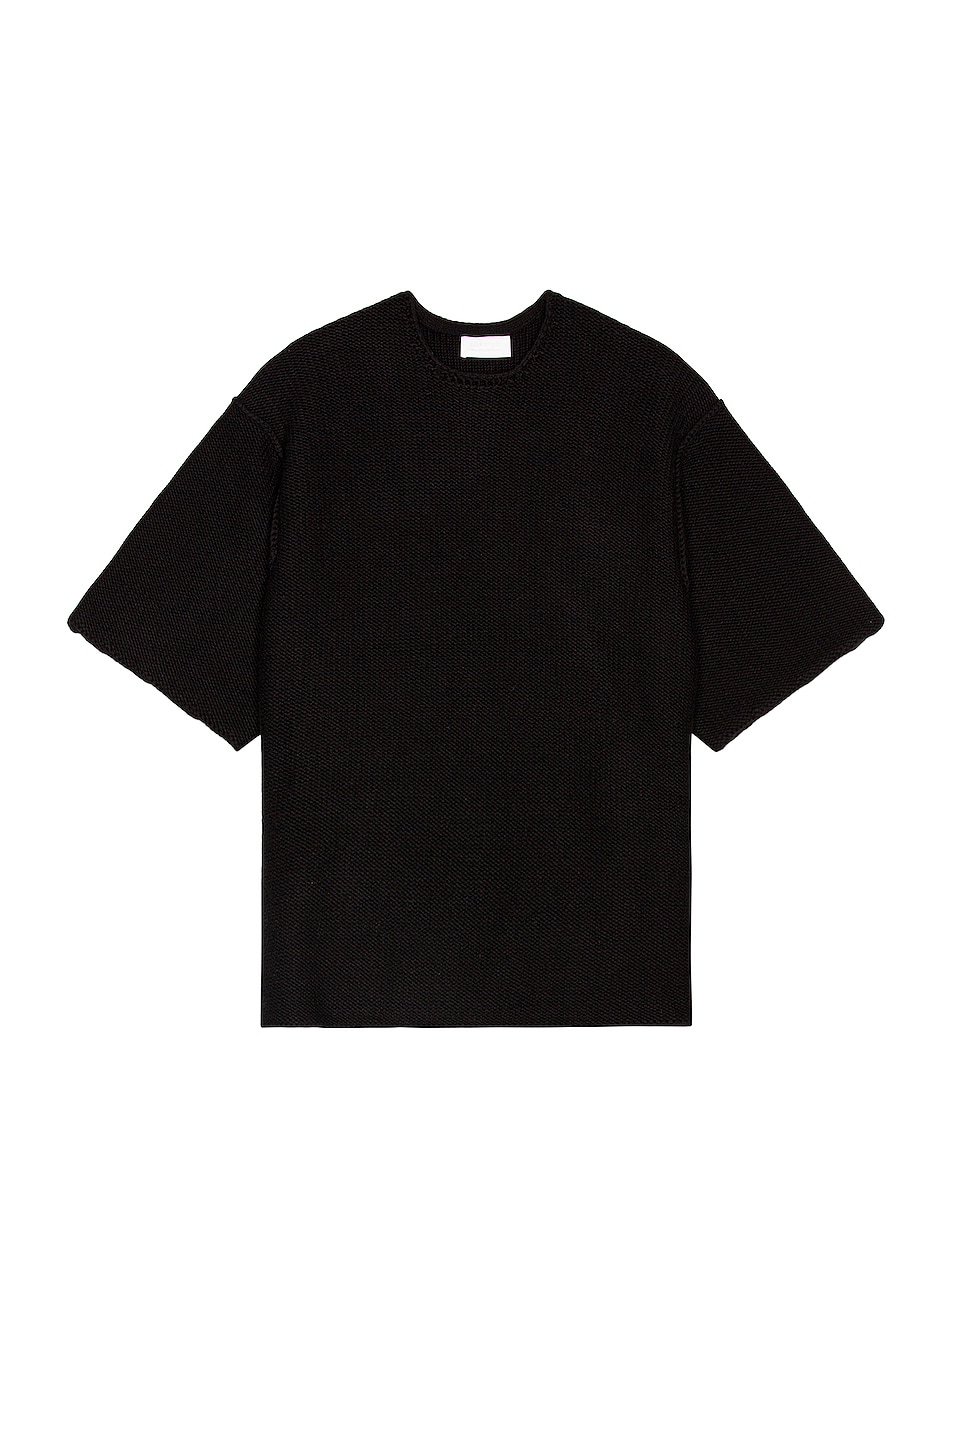 Image 1 of Fear of God Exclusively for Ermenegildo Zegna Knitted Sweater in Black